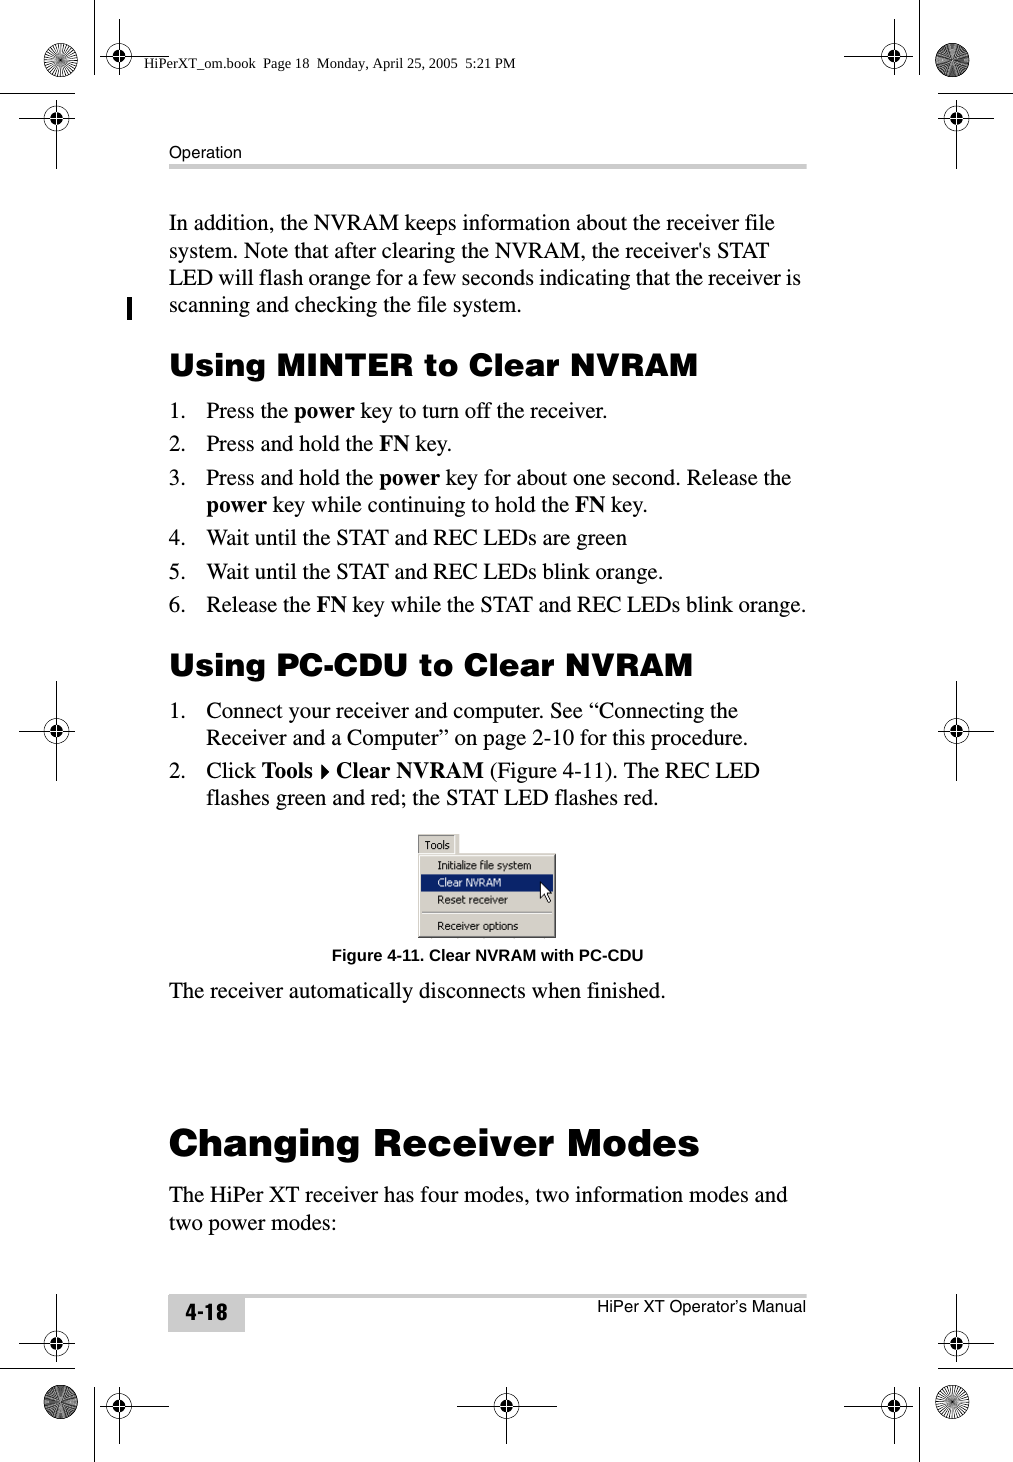 OperationHiPer XT Operator’s Manual4-18In addition, the NVRAM keeps information about the receiver file system. Note that after clearing the NVRAM, the receiver&apos;s STAT LED will flash orange for a few seconds indicating that the receiver is scanning and checking the file system. Using MINTER to Clear NVRAM1. Press the power key to turn off the receiver.2. Press and hold the FN key.3. Press and hold the power key for about one second. Release the power key while continuing to hold the FN key.4. Wait until the STAT and REC LEDs are green5. Wait until the STAT and REC LEDs blink orange.6. Release the FN key while the STAT and REC LEDs blink orange.Using PC-CDU to Clear NVRAM1. Connect your receiver and computer. See “Connecting the Receiver and a Computer” on page 2-10 for this procedure.2. Click ToolsClear NVRAM (Figure 4-11). The REC LED flashes green and red; the STAT LED flashes red.Figure 4-11. Clear NVRAM with PC-CDUThe receiver automatically disconnects when finished.Changing Receiver ModesThe HiPer XT receiver has four modes, two information modes and two power modes:HiPerXT_om.book  Page 18  Monday, April 25, 2005  5:21 PM